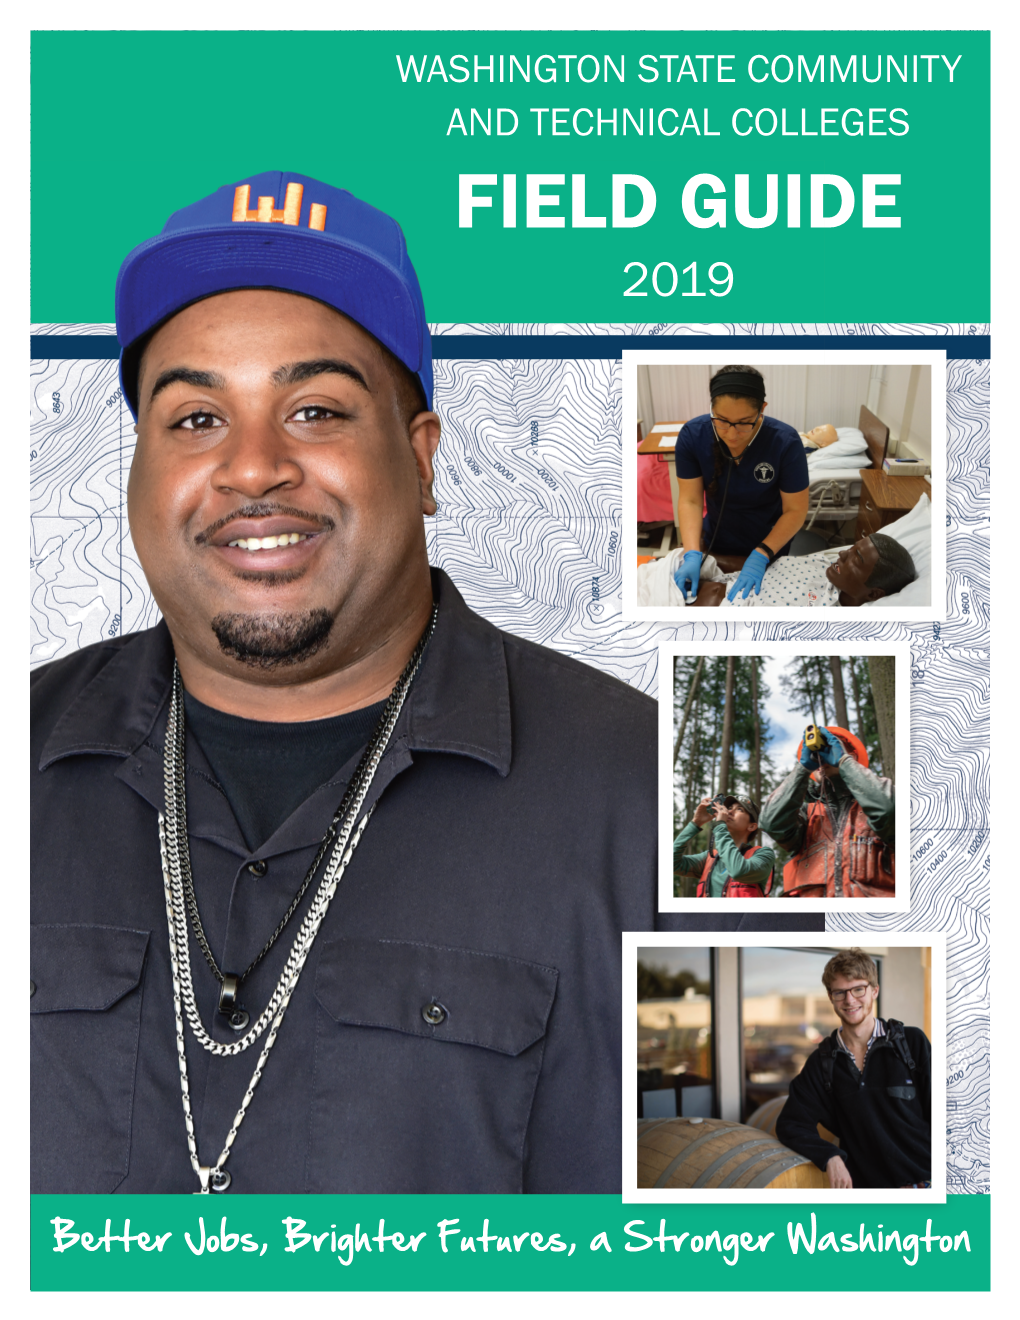 Washington State Community and Technical Colleges Field Guide 2019